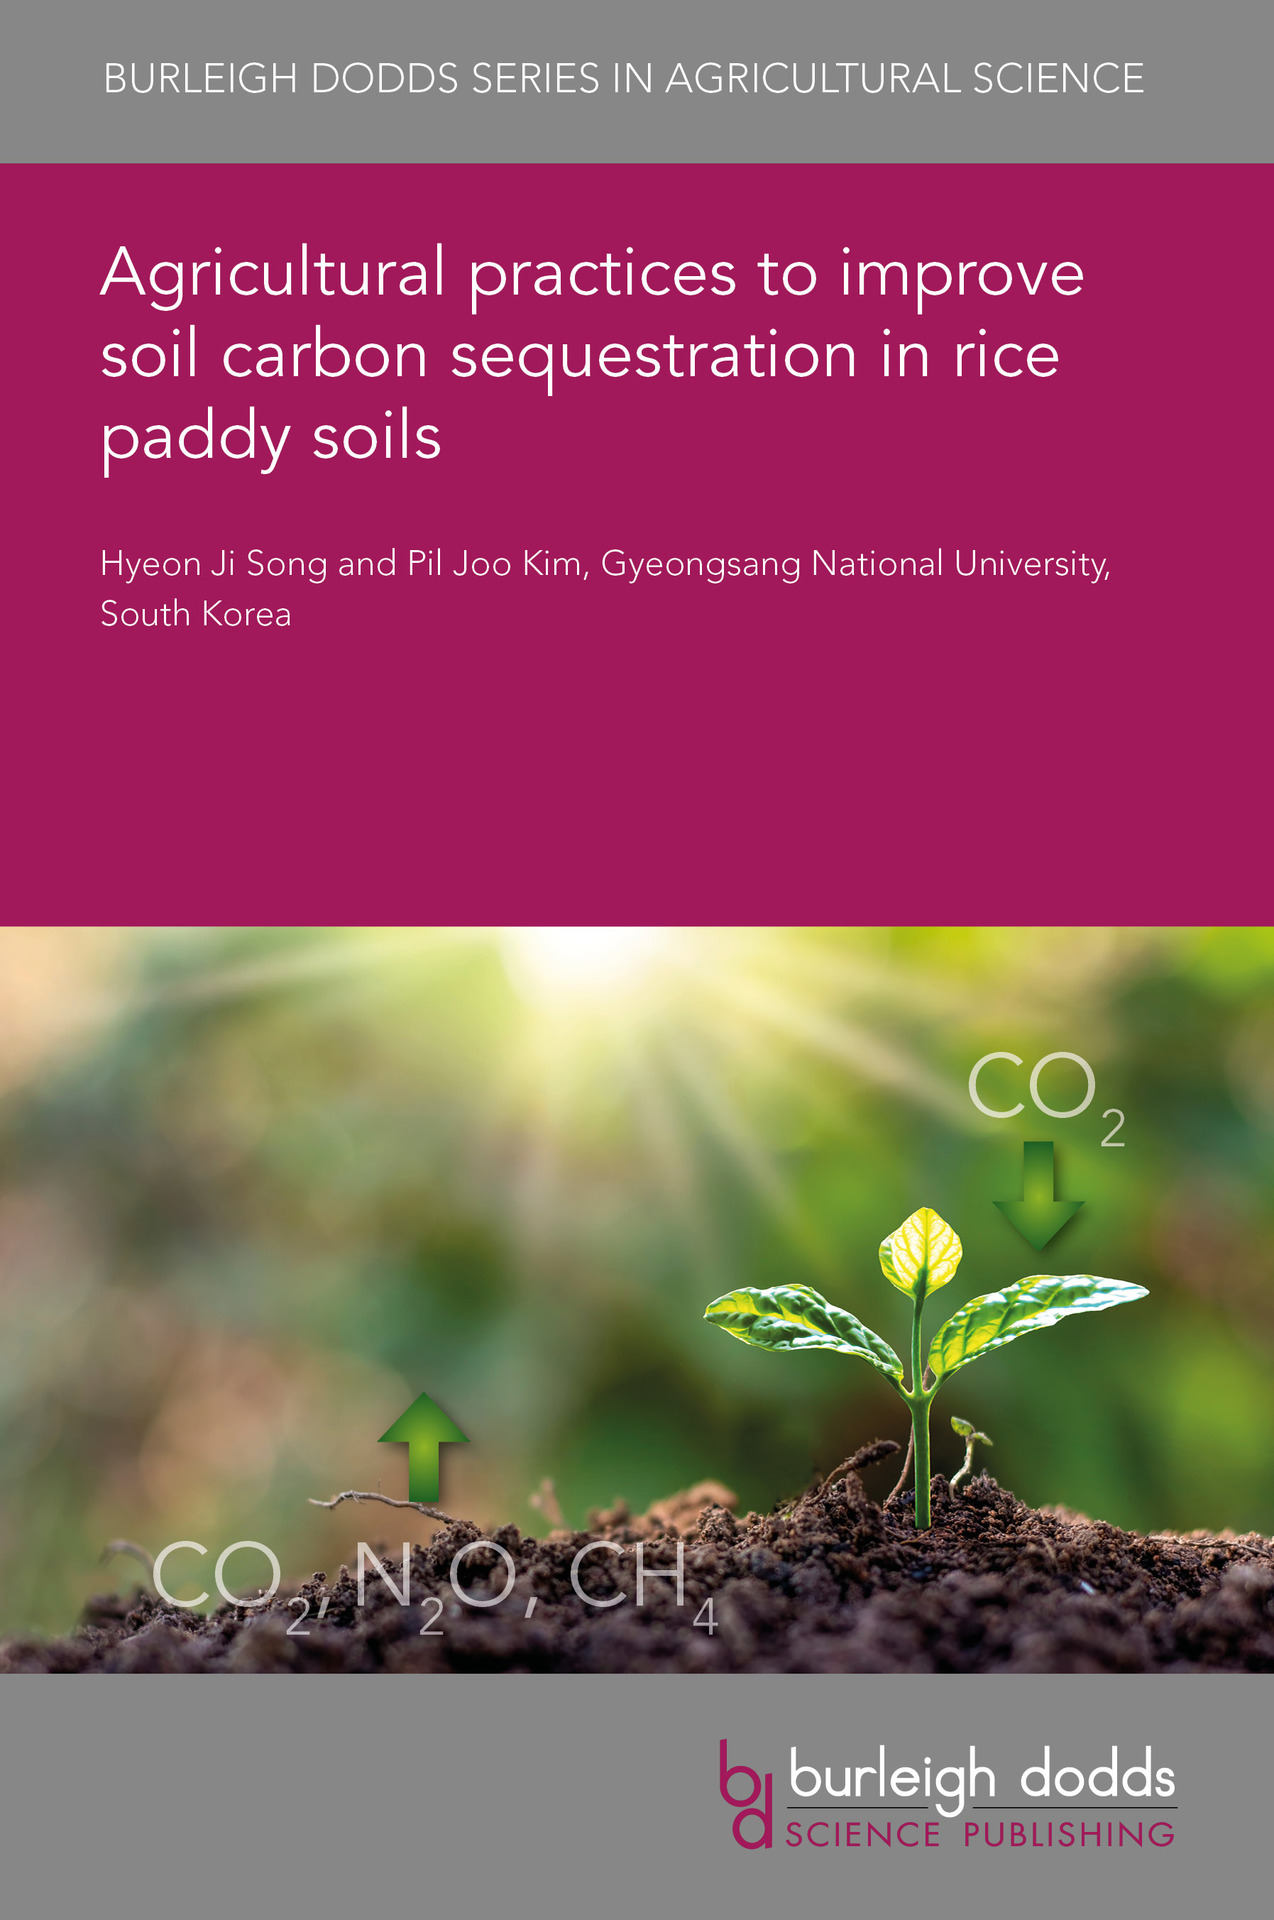 Agricultural practices to improve soil carbon sequestration in rice paddy soils